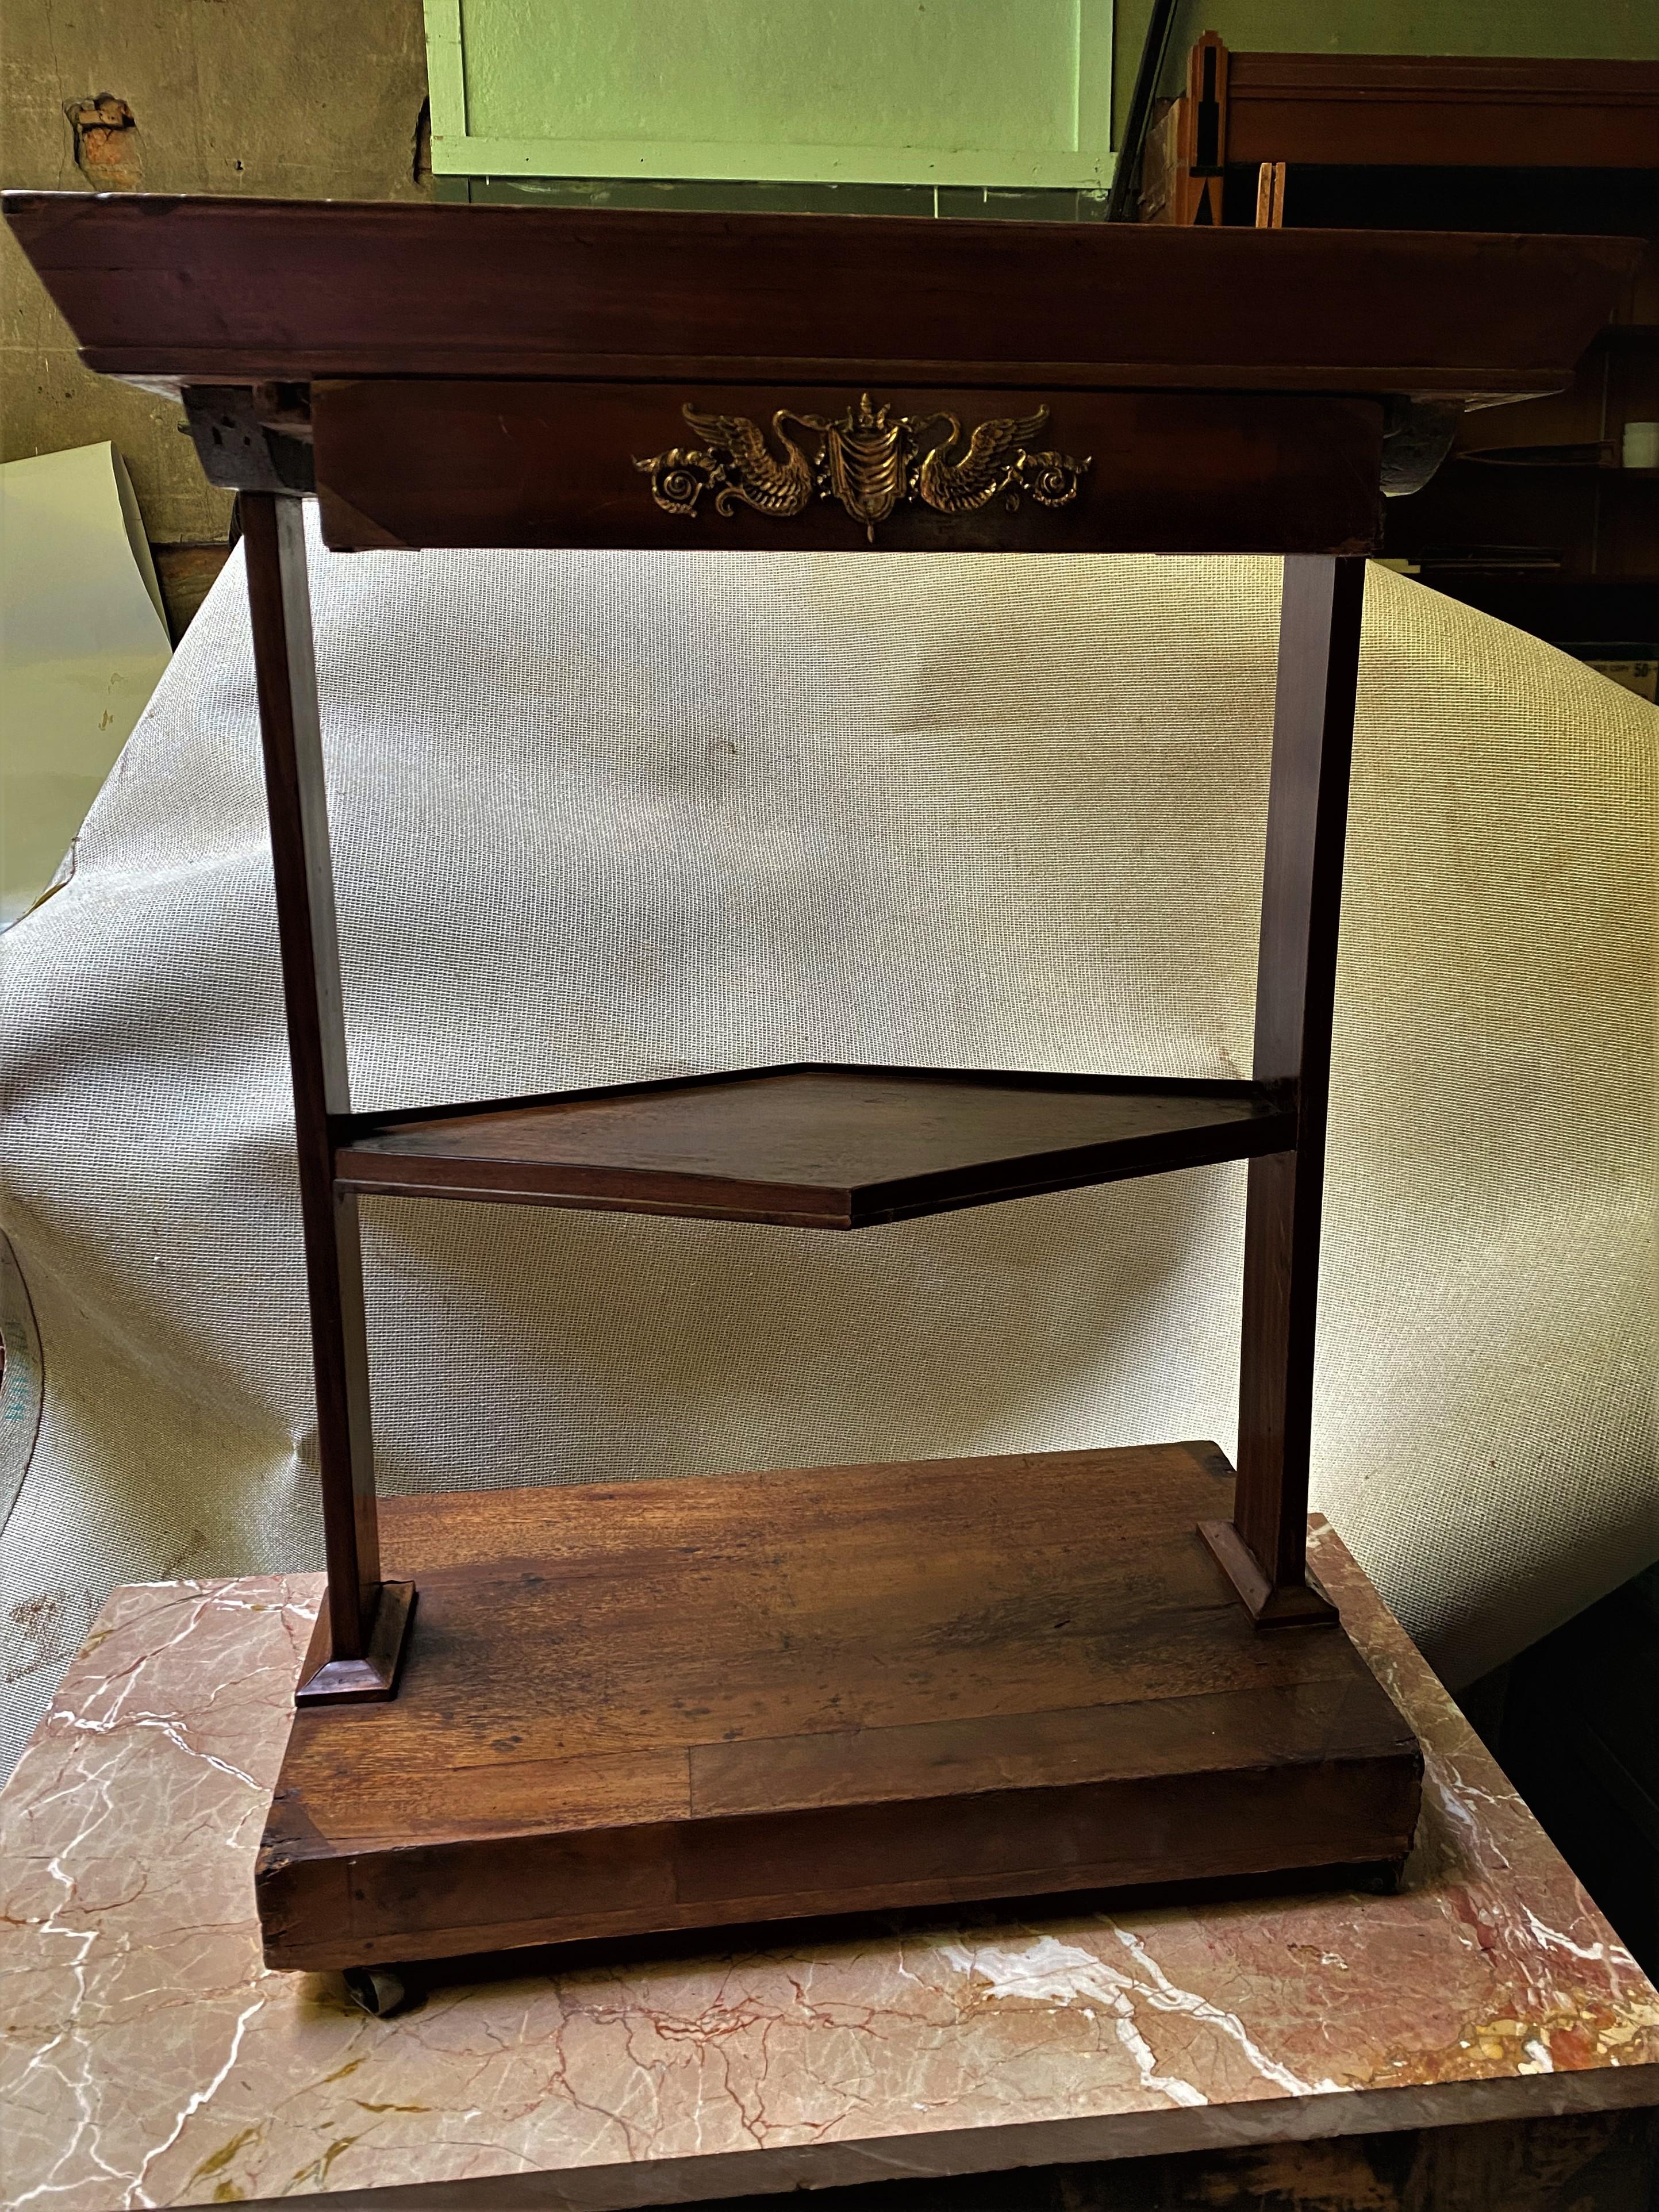 This is the sweetest small table with great mahogany grained veneer and a nice 1 1/2 inch deep tray top. It rolls easily on brass castors and the diamond shaped shelf with a fine edge is classy, but the table has many repairs and signs of age and